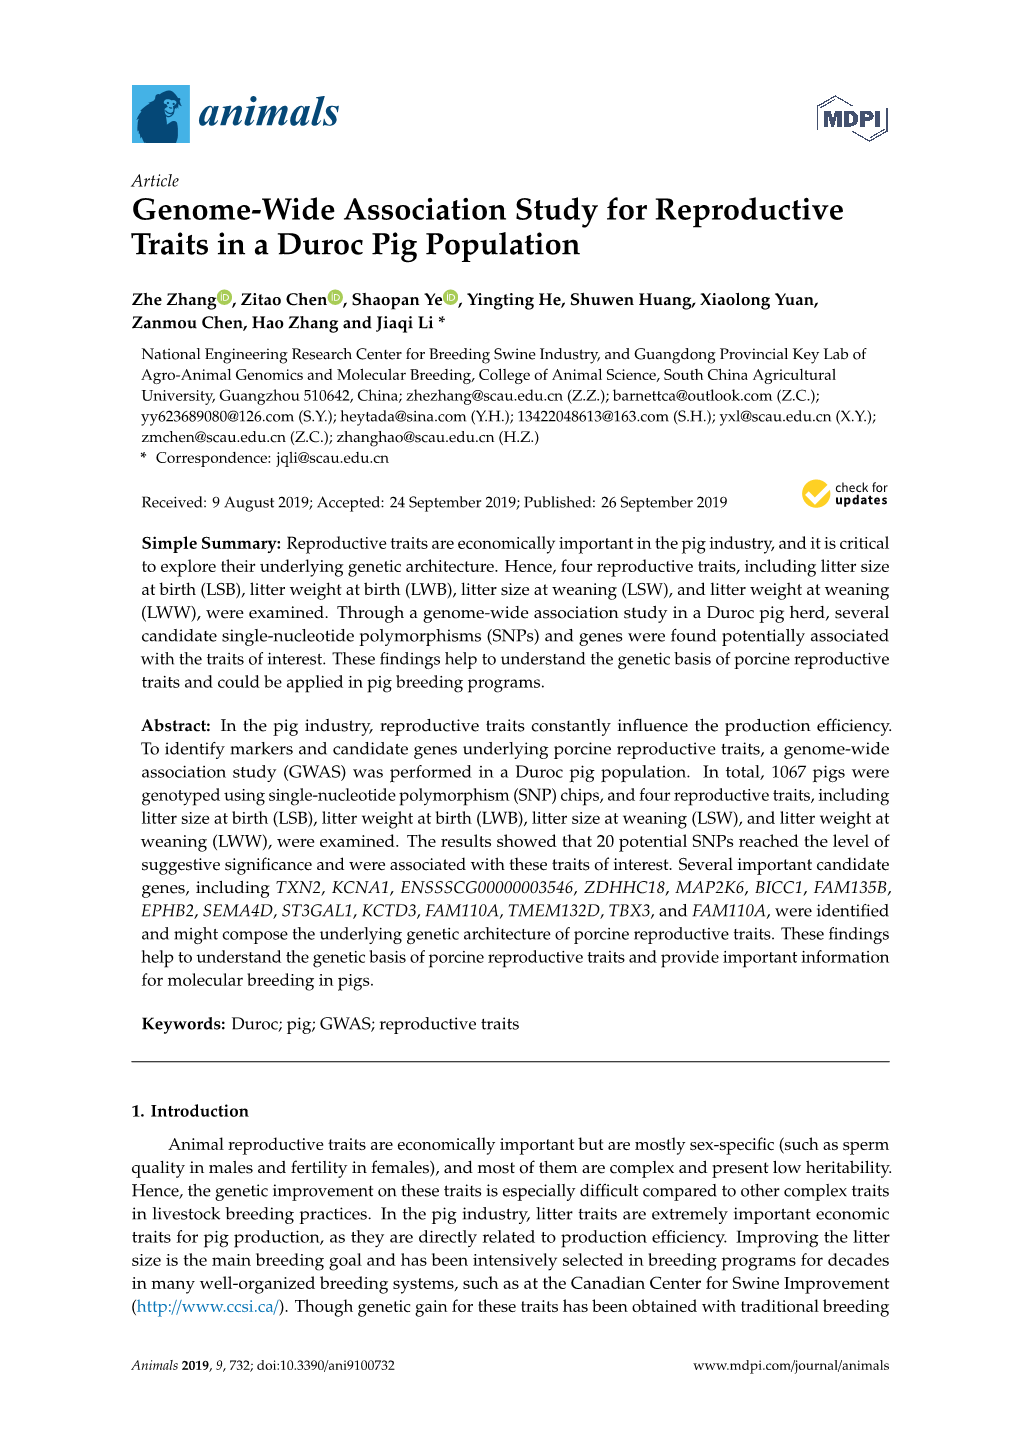 Genome-Wide Association Study for Reproductive Traits in a Duroc Pig Population